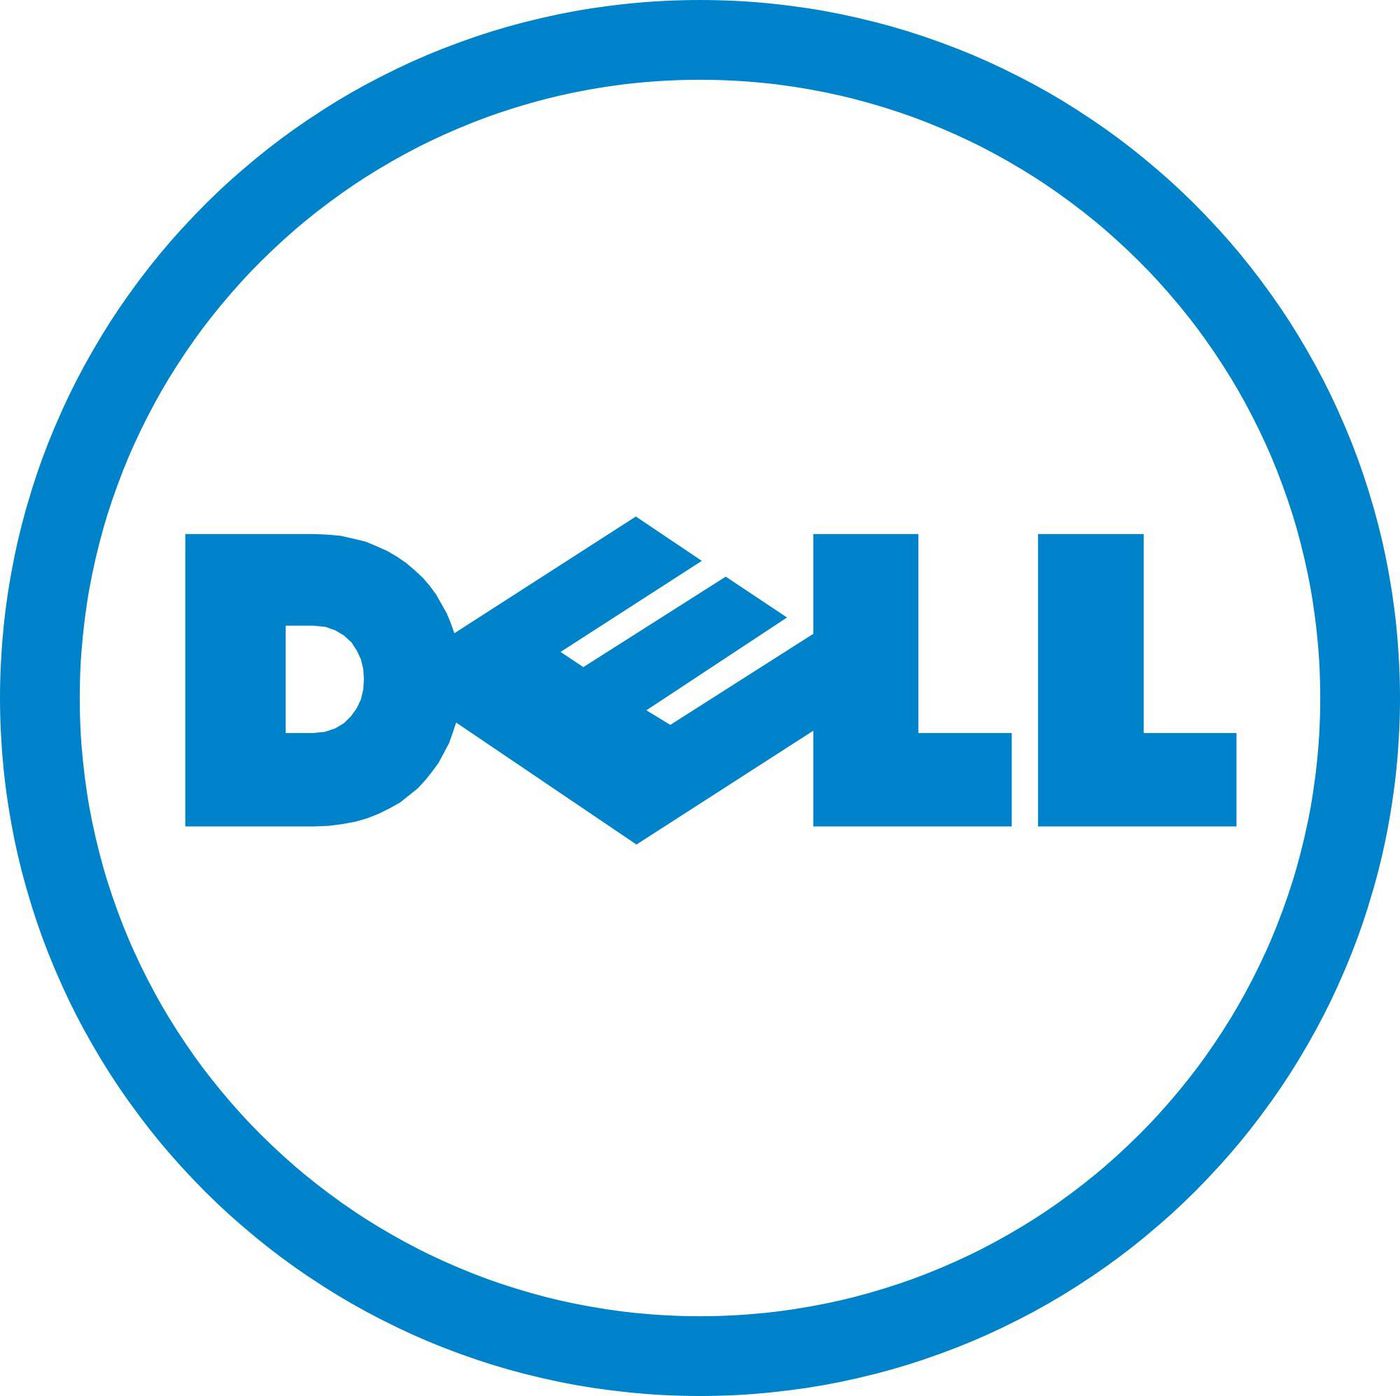 DELL 5 Year Gold Hardware Maintenance by Avocent for the Dell DMPU2016